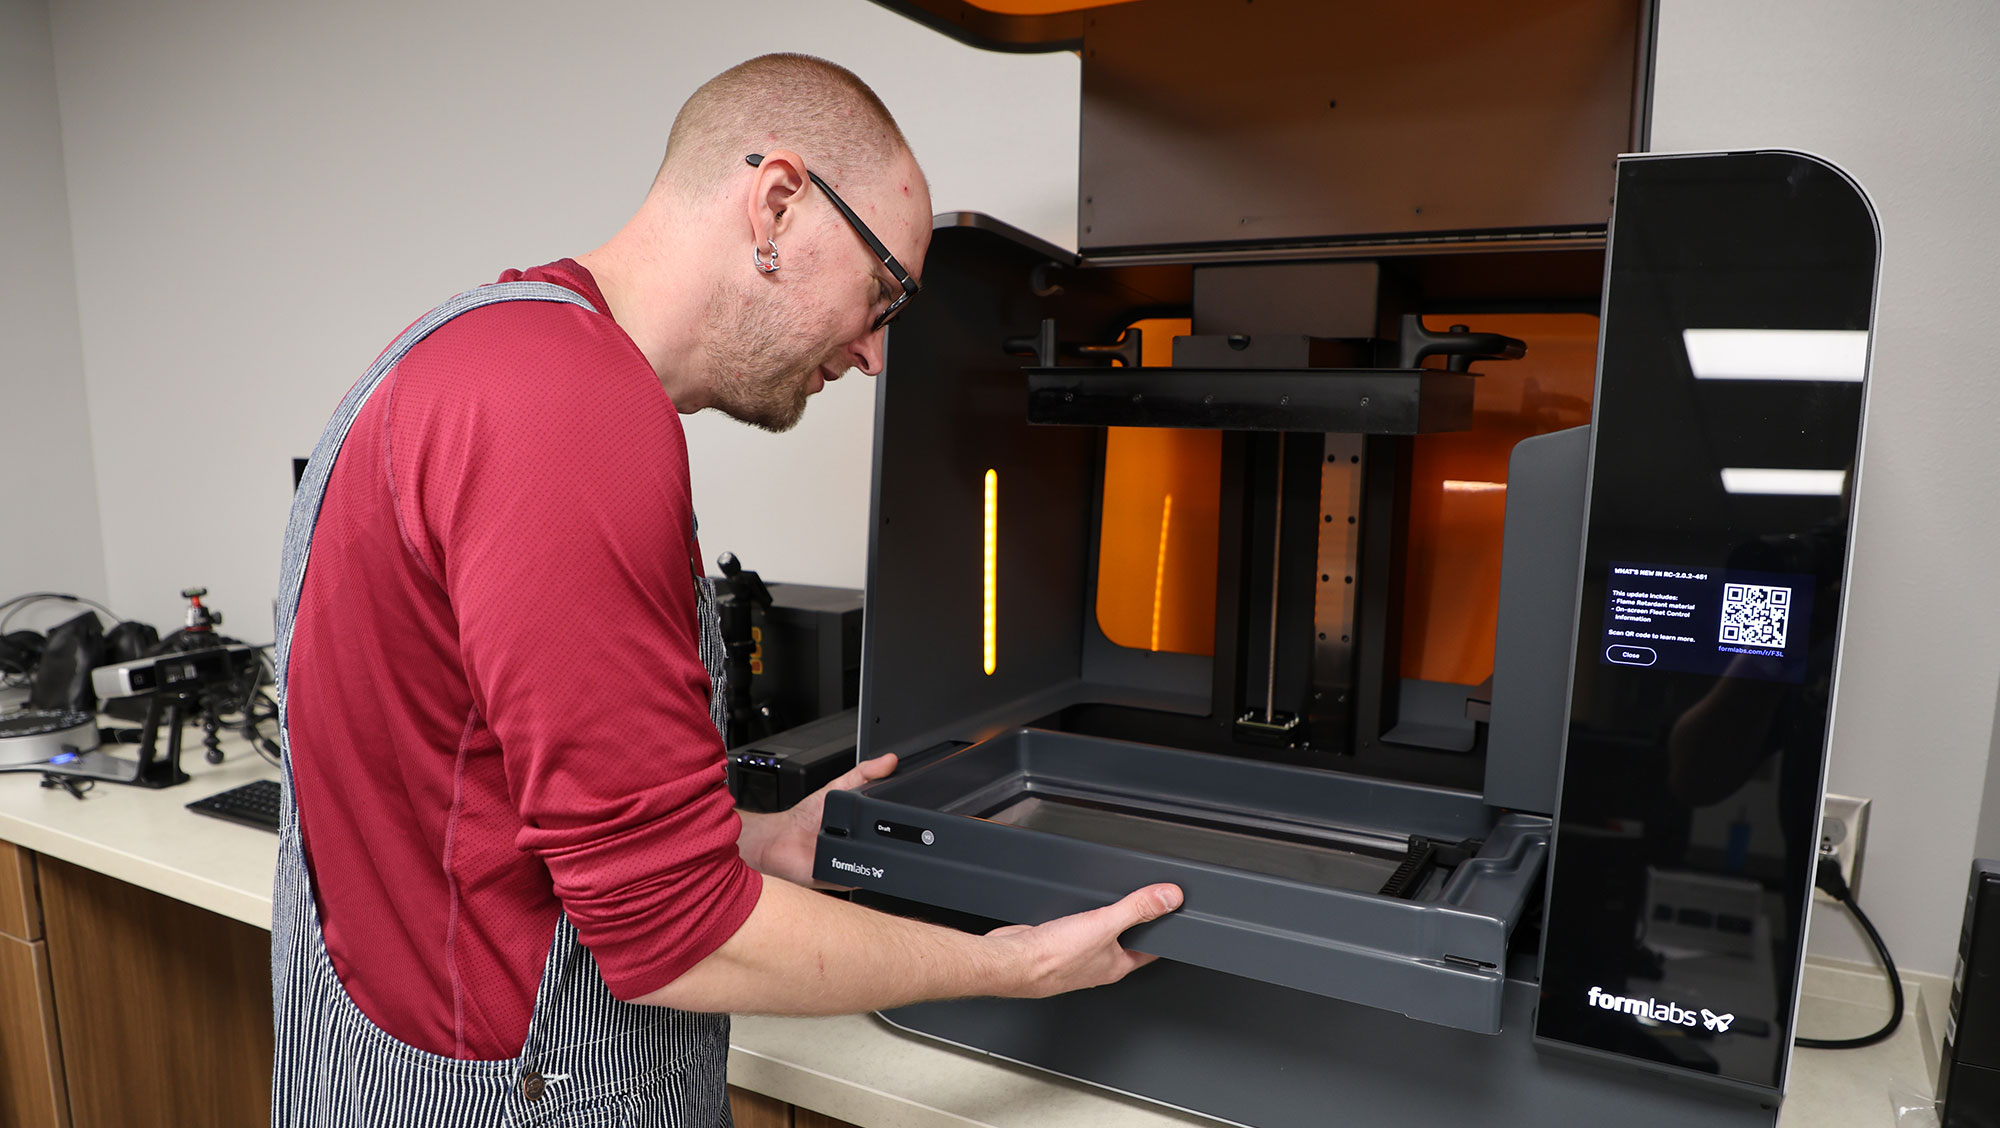 Aaron Bauerly, systems librarian and makerspace coordinator at BHSU, carefully removes the resin tray from the resin 3D printer in the Innovation Lab in the lower level of the E.Y. Berry Library-Learning Center.